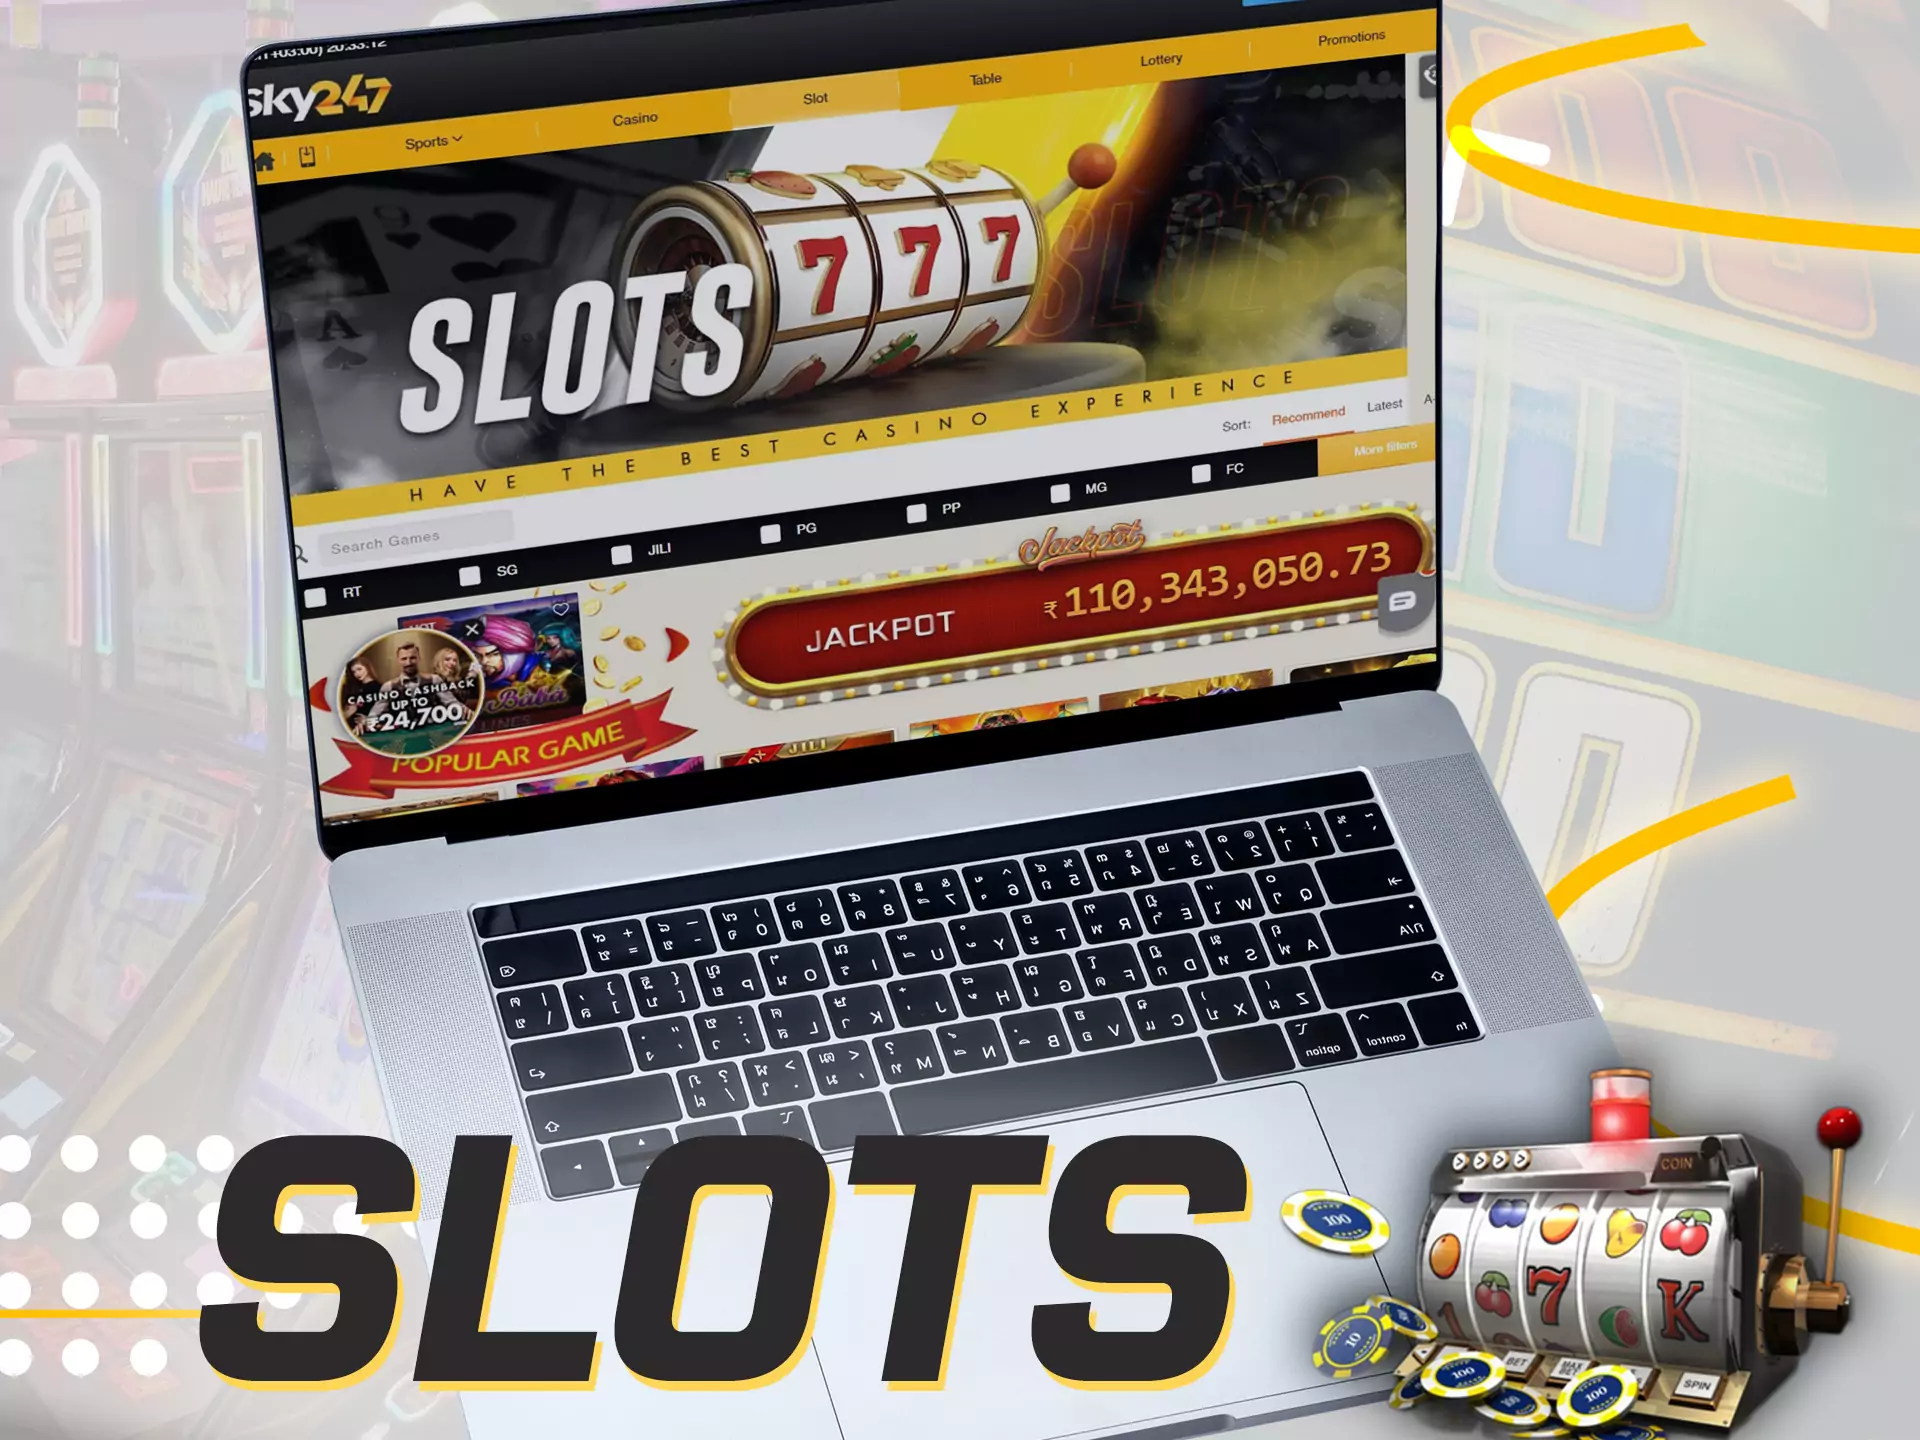 In the Sky247 online casino, you can play colourful slots.